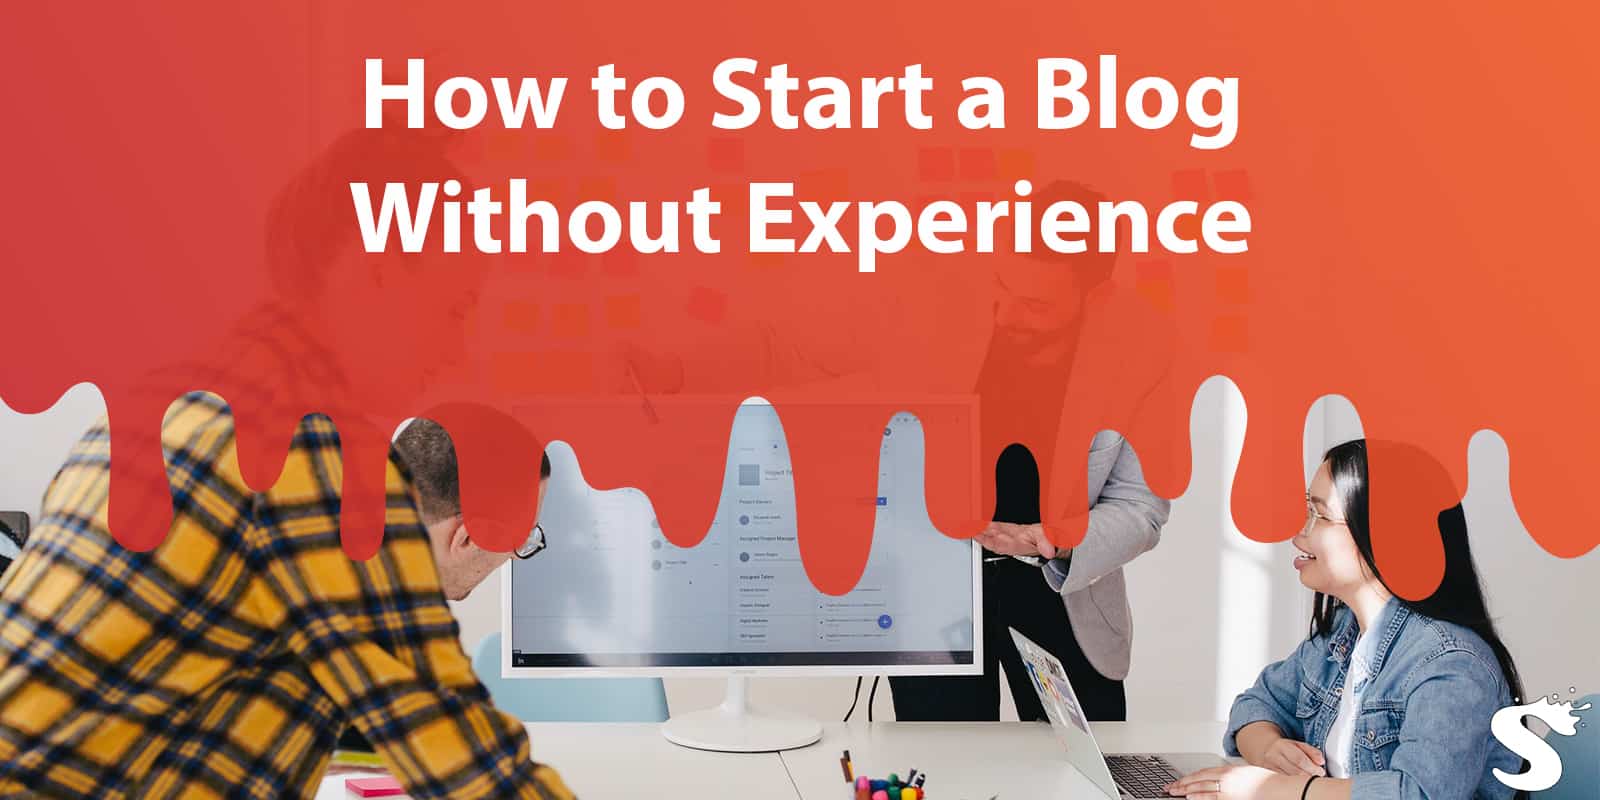 Tips of How to Start a Blog Without Experience